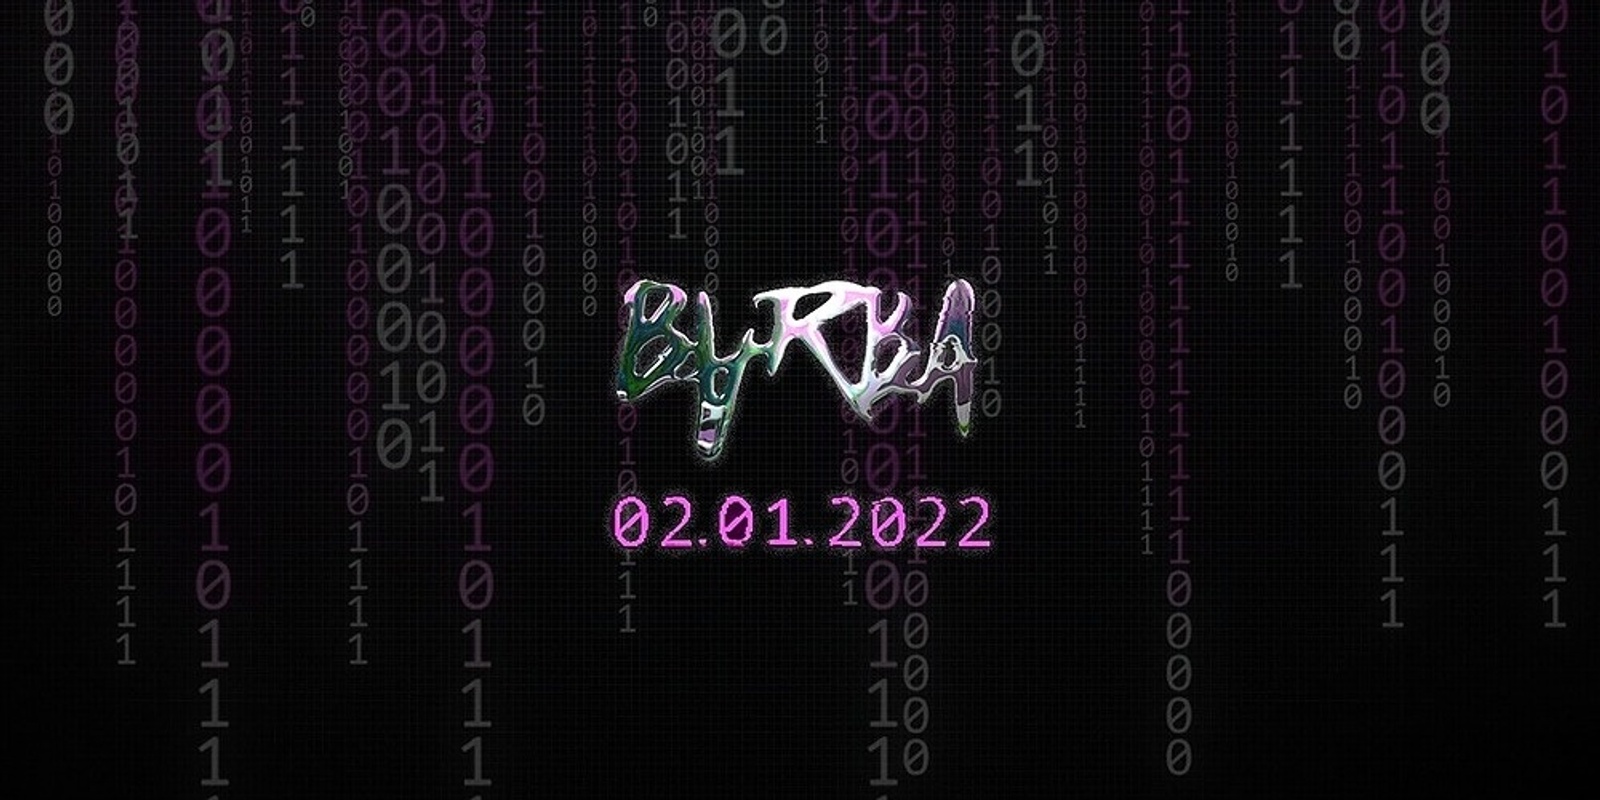 Banner image for BARBA PARTY 02.01.2022